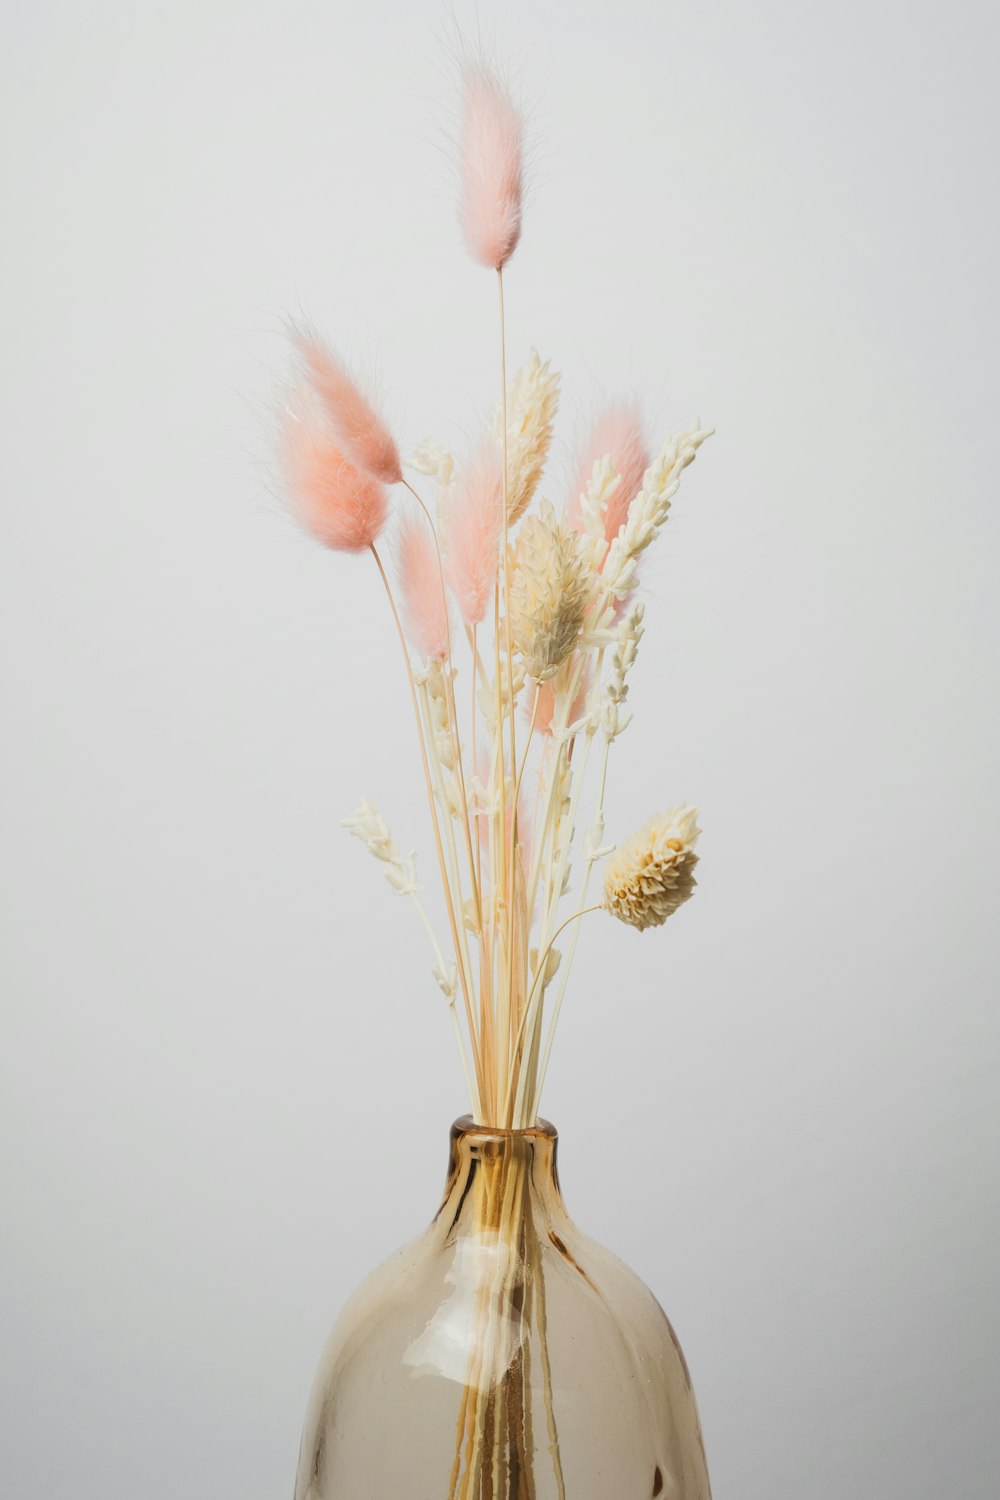 brown and white flower in vase